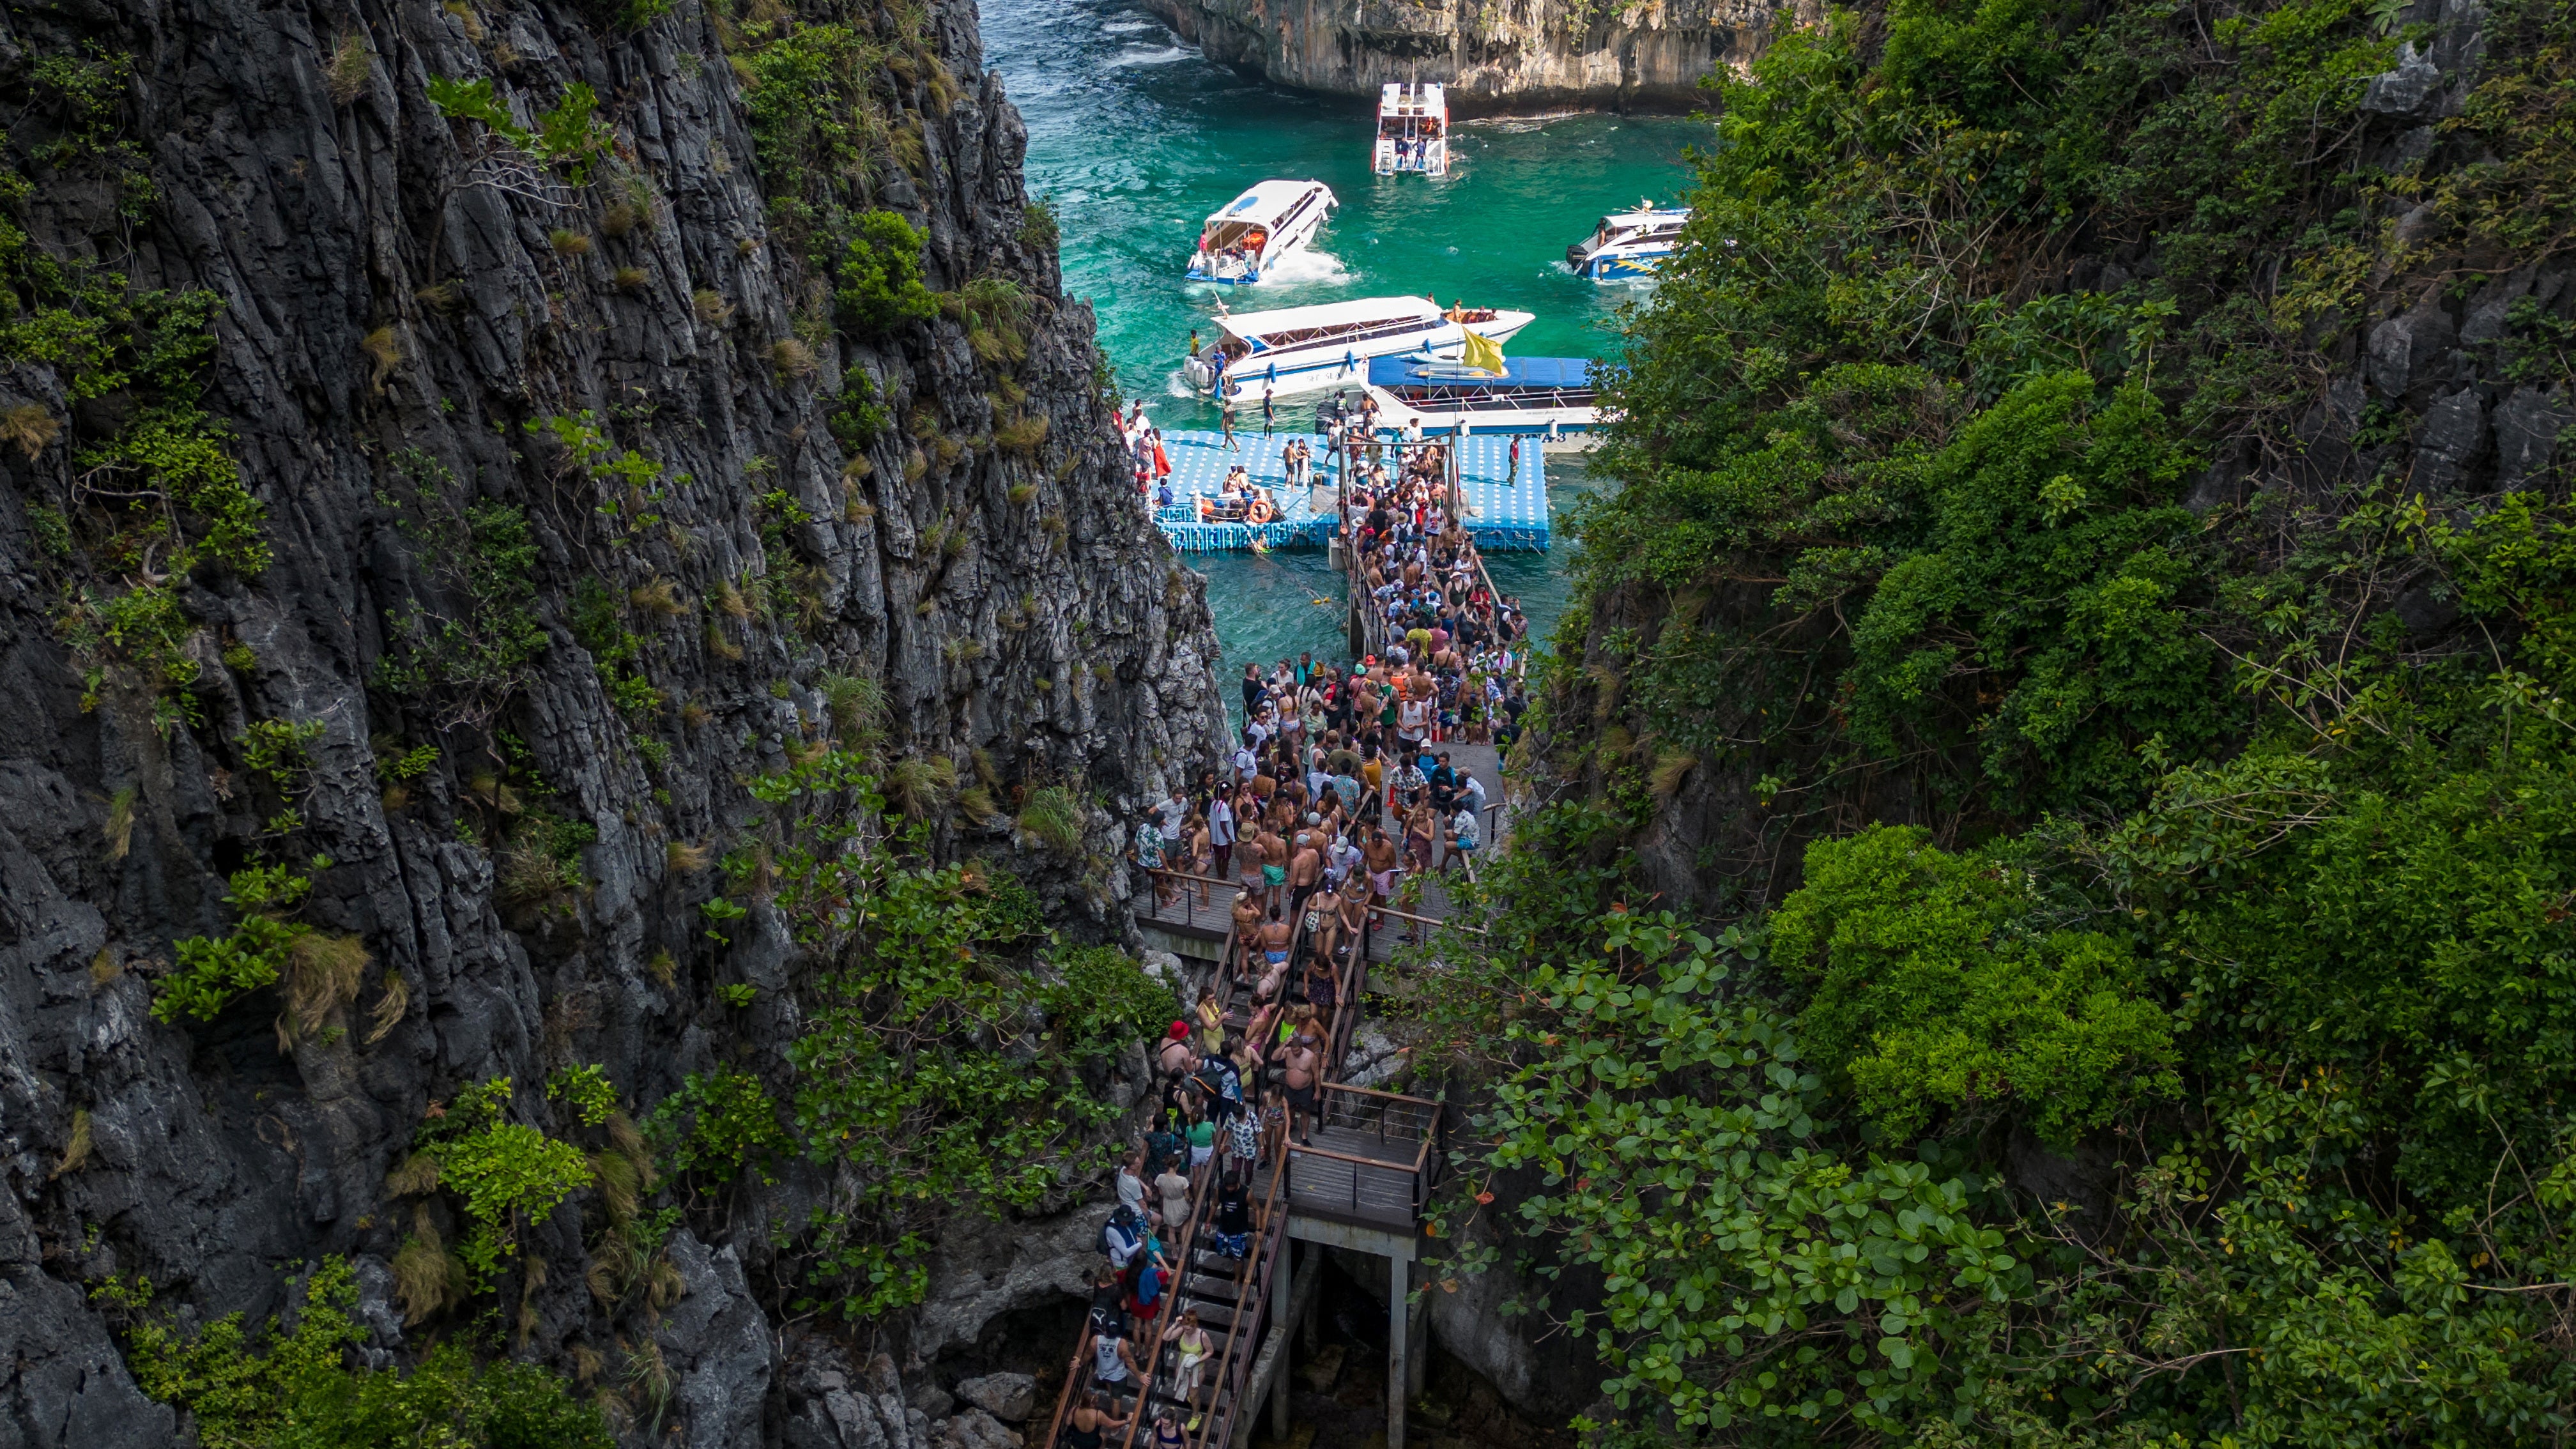 Tourists arrive for an hour-long visit to Maya Bay beach through a new pier constructed over a reef in Loh Samah Bay beach